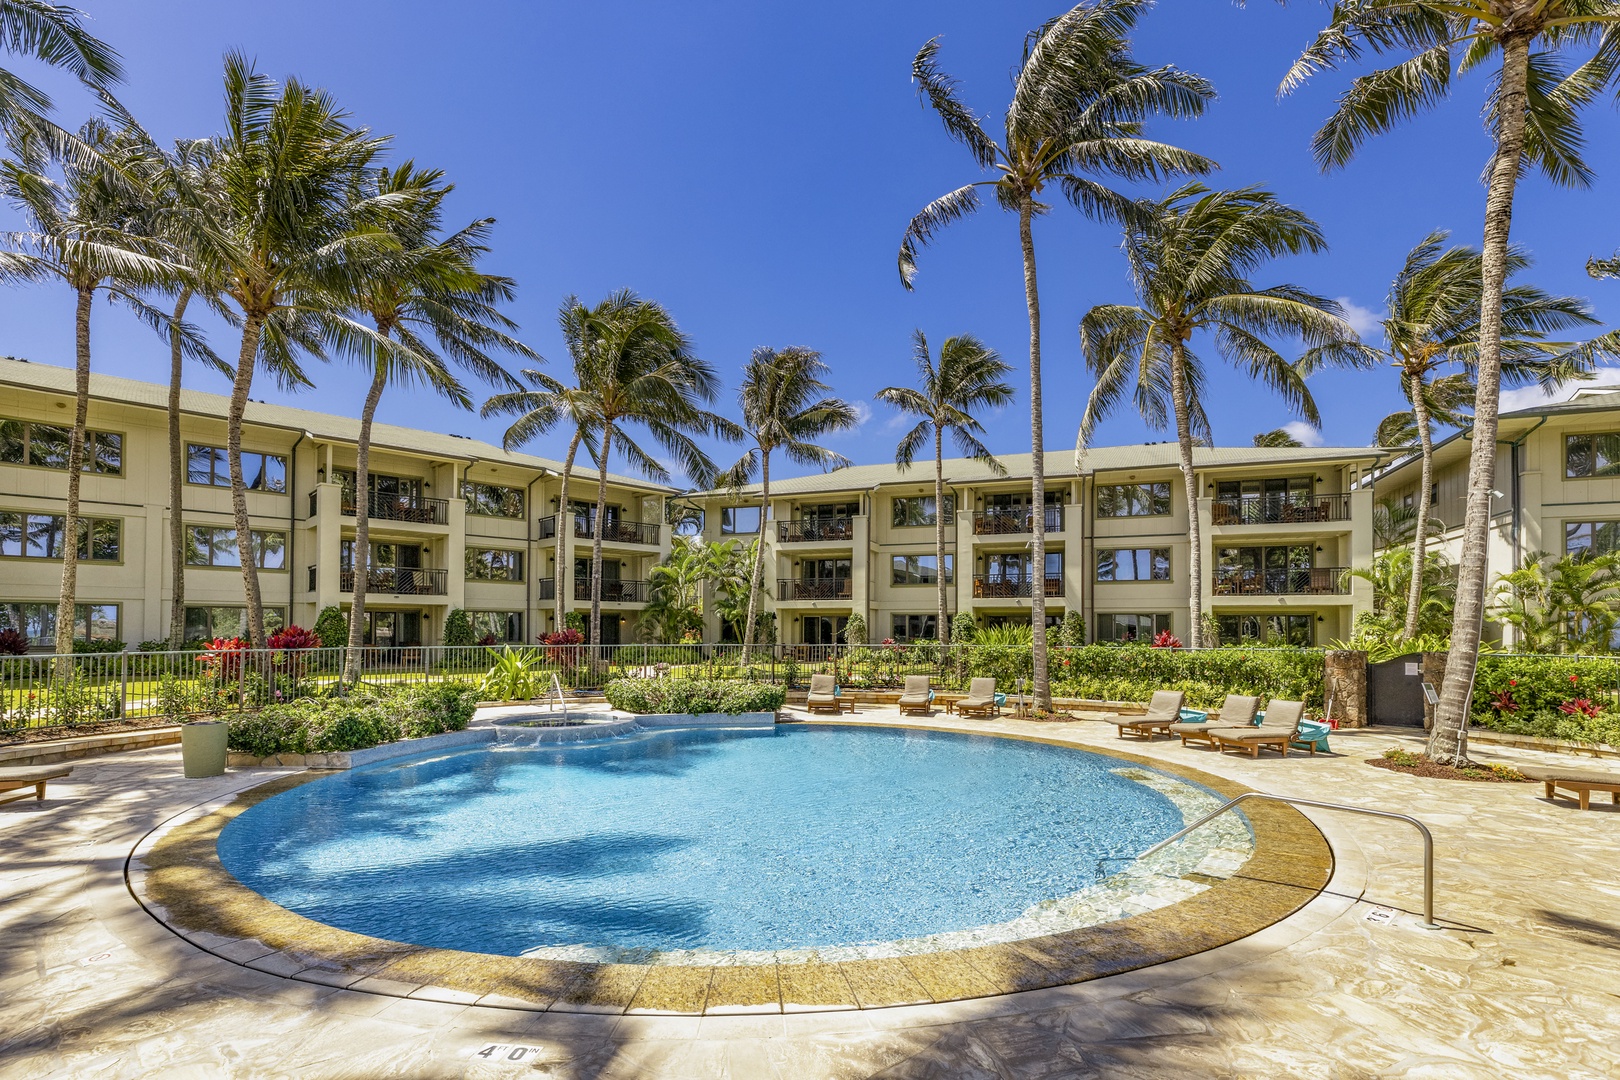 Kahuku Vacation Rentals, Turtle Bay Villas 201 - Access to resort amenities is not included, however, the condo complex has its own pool, grills and is just steps to the beach!